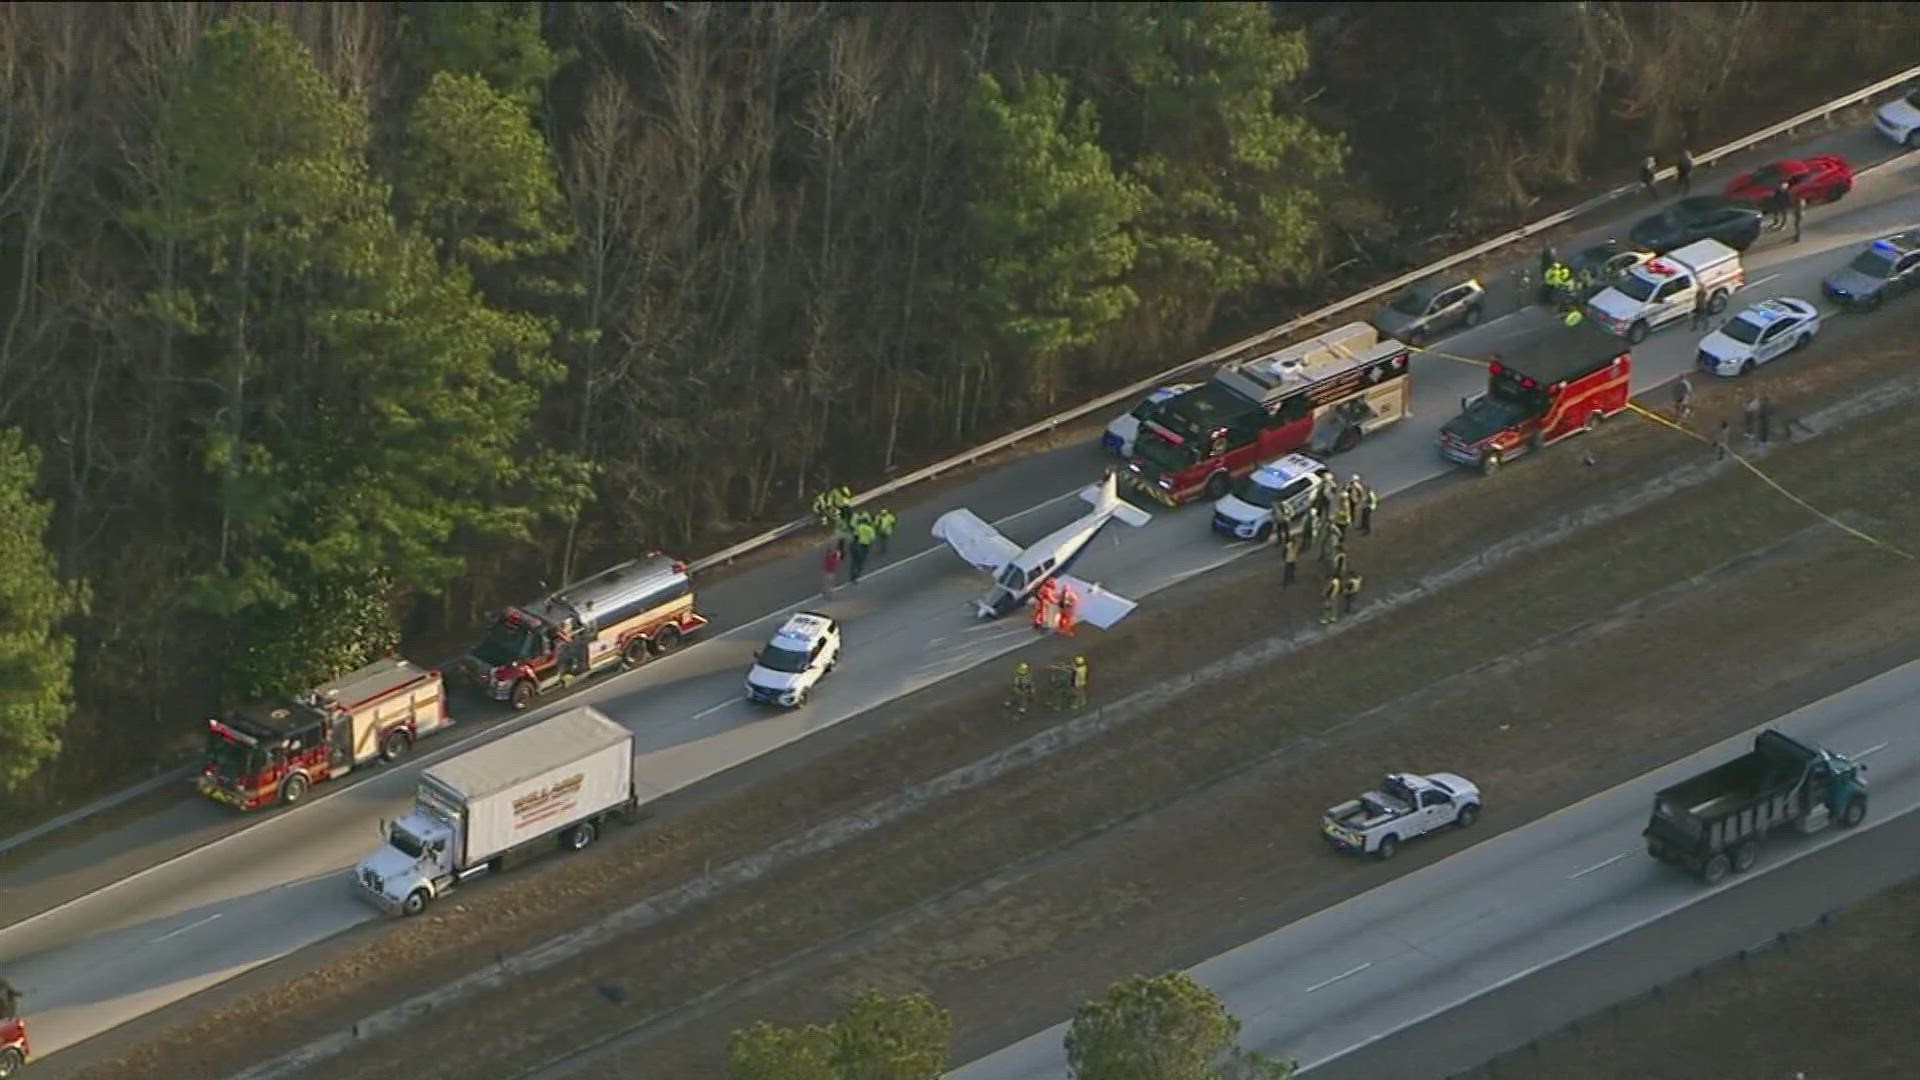 The Georgia State Patrol is on scene investigating after the plane landed on I-985 in Buford.